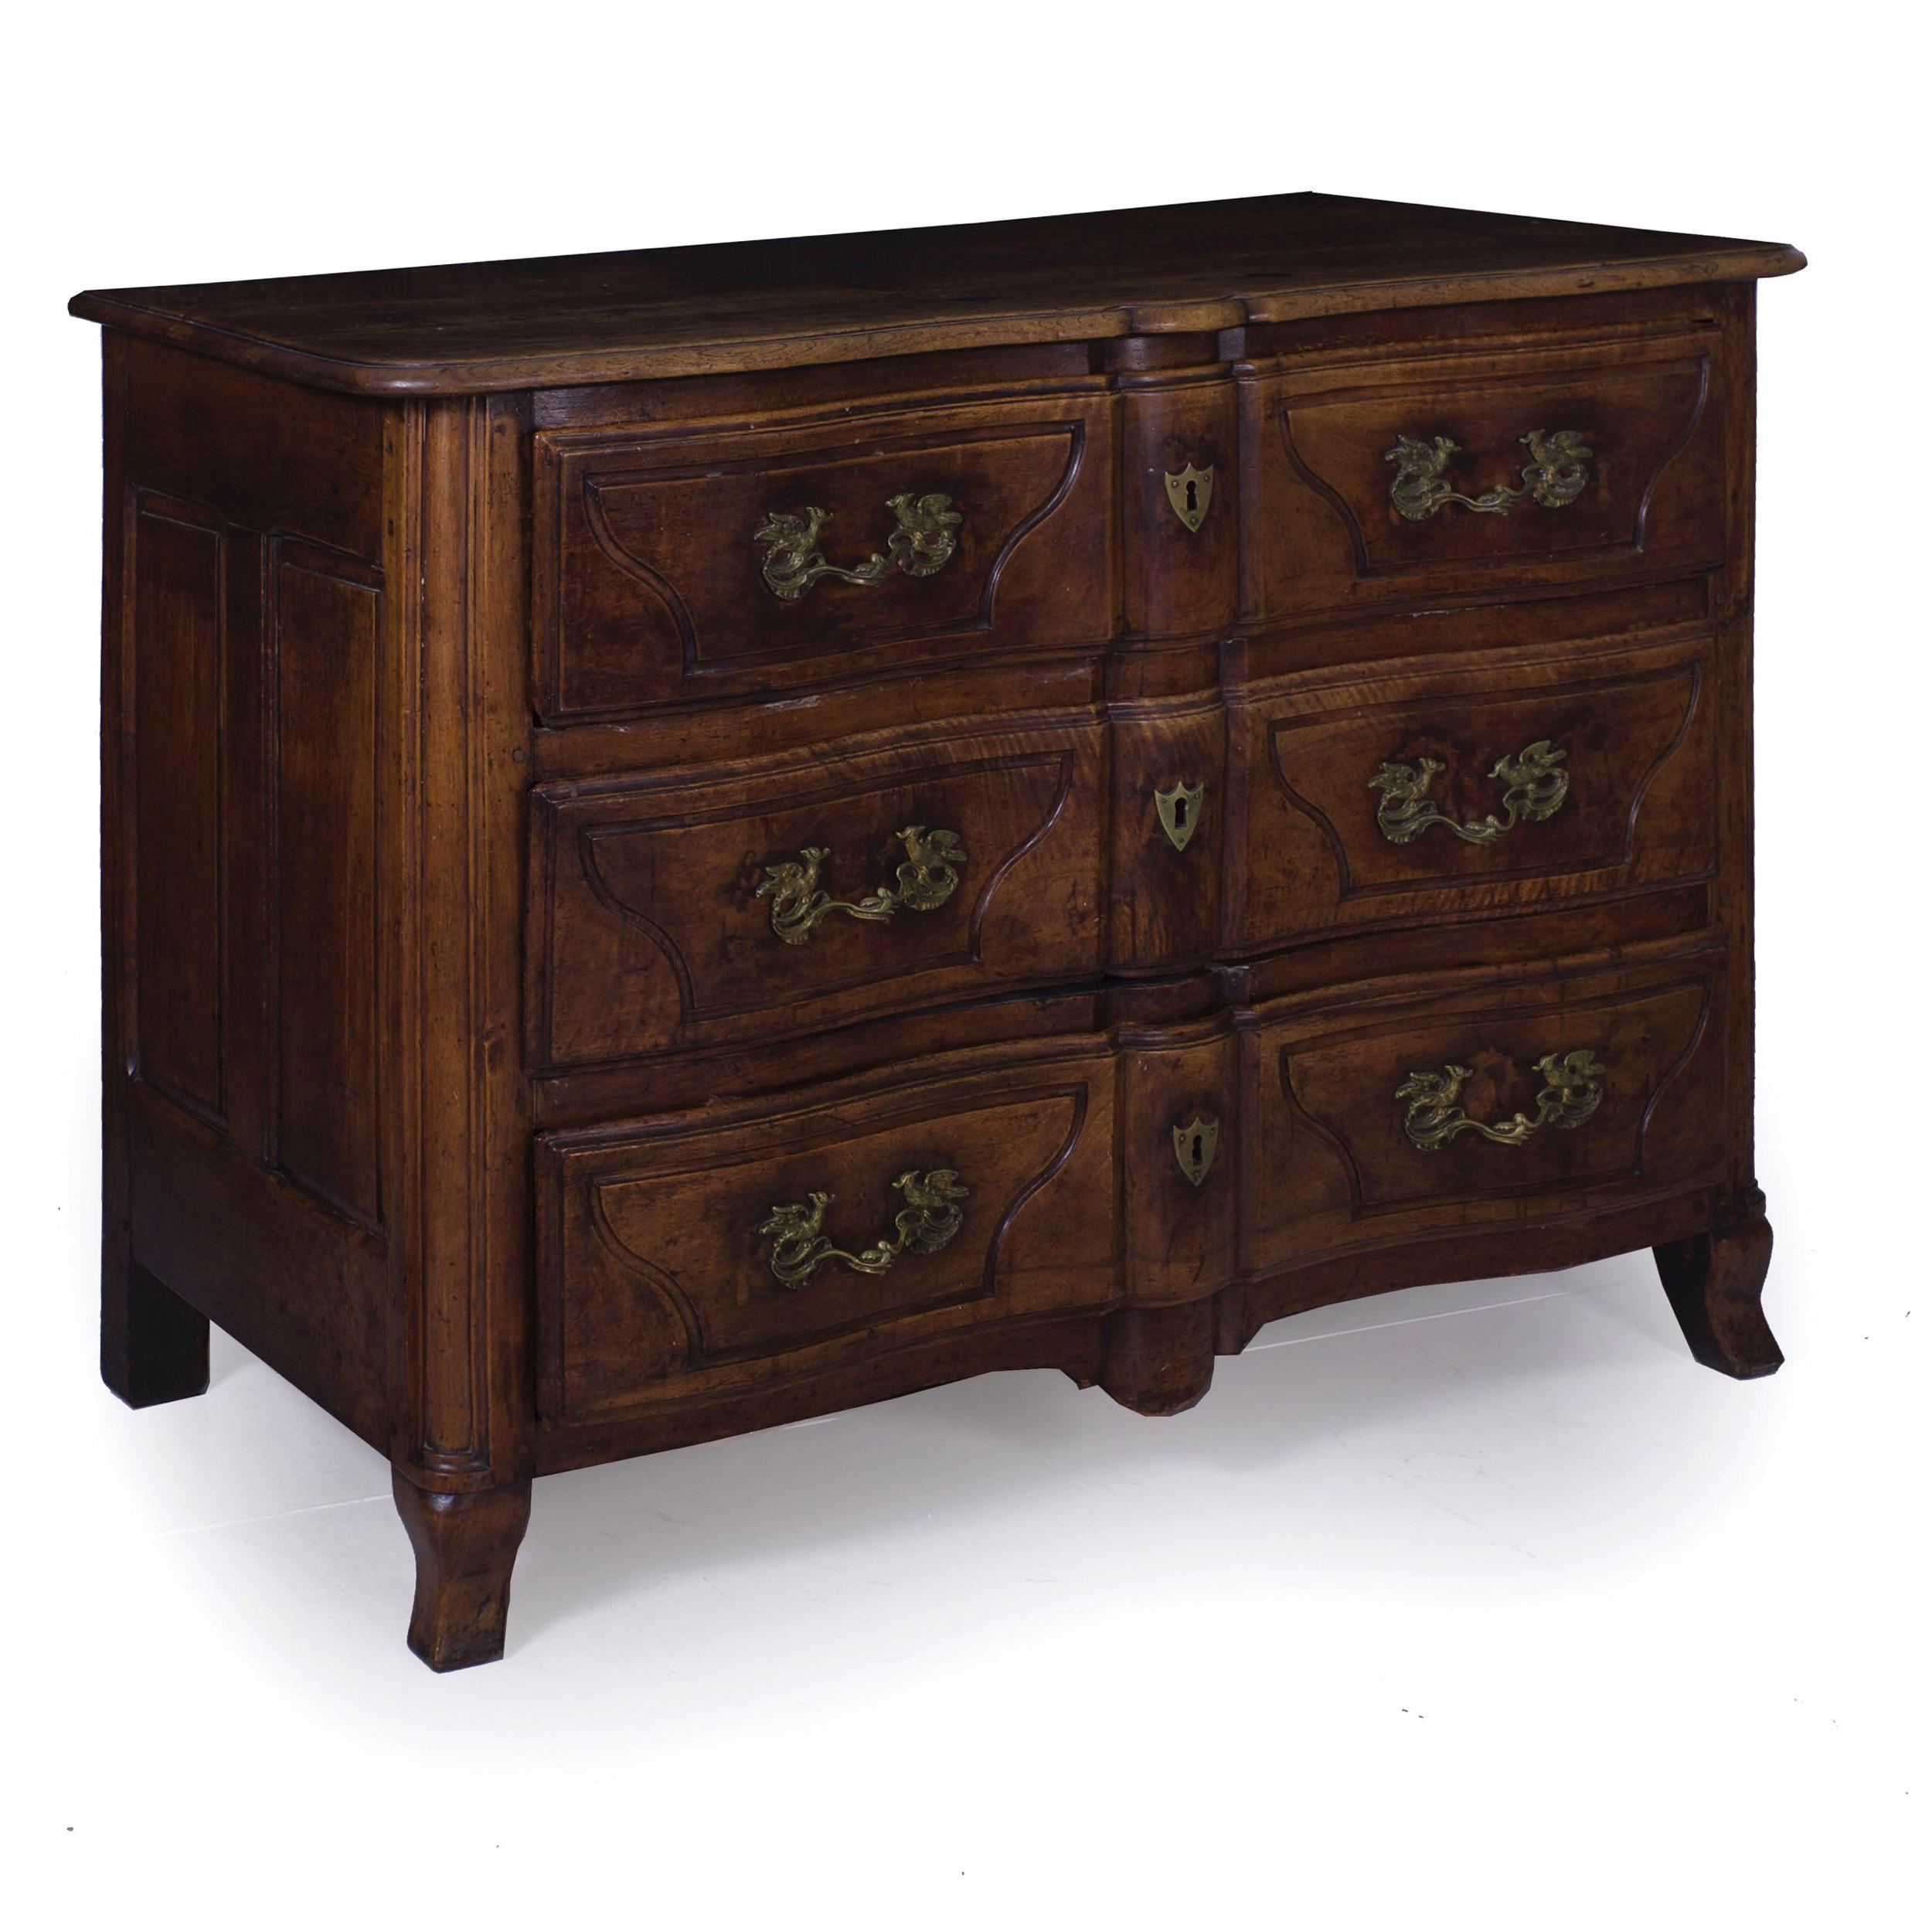 A rare and very fine 18th century commode of the Regencé period, this substantial chest of drawers has been beautifully preserved. The dense walnut wood has taken on the most lovely historical surface with a silky glowing patina from years of gentle